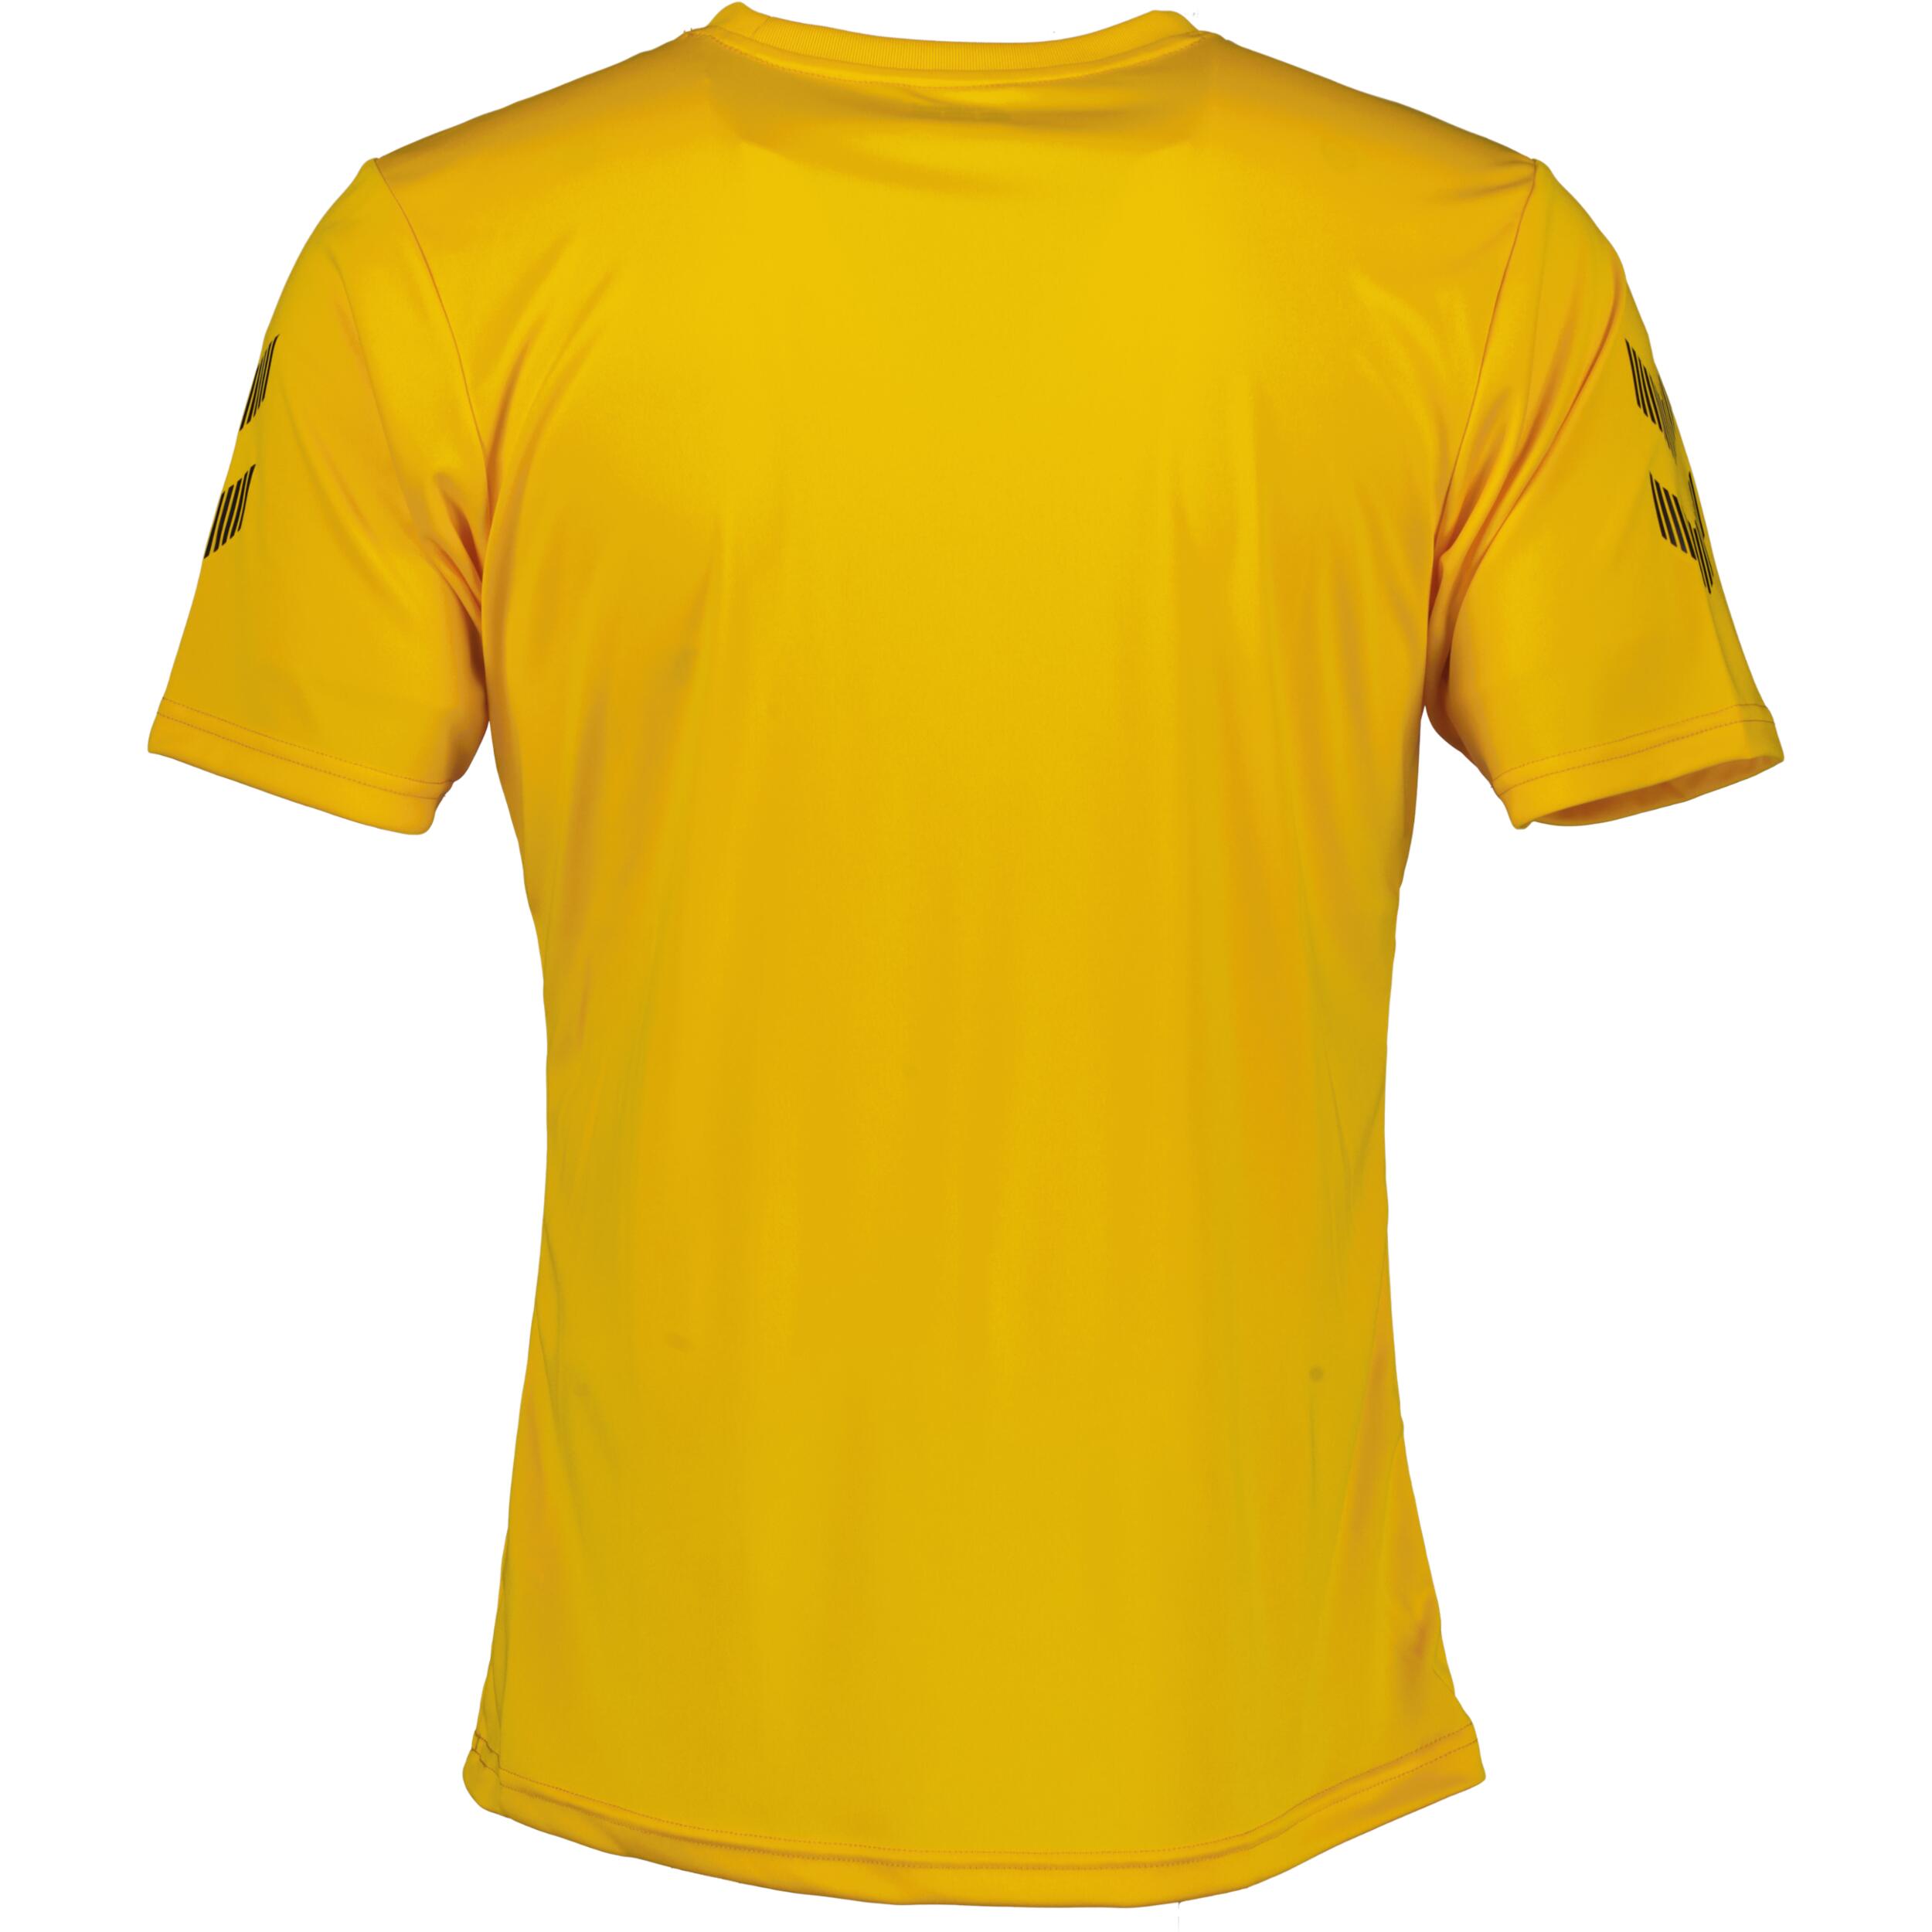 Solo jersey for men, great for football, in sports yellow 2/3